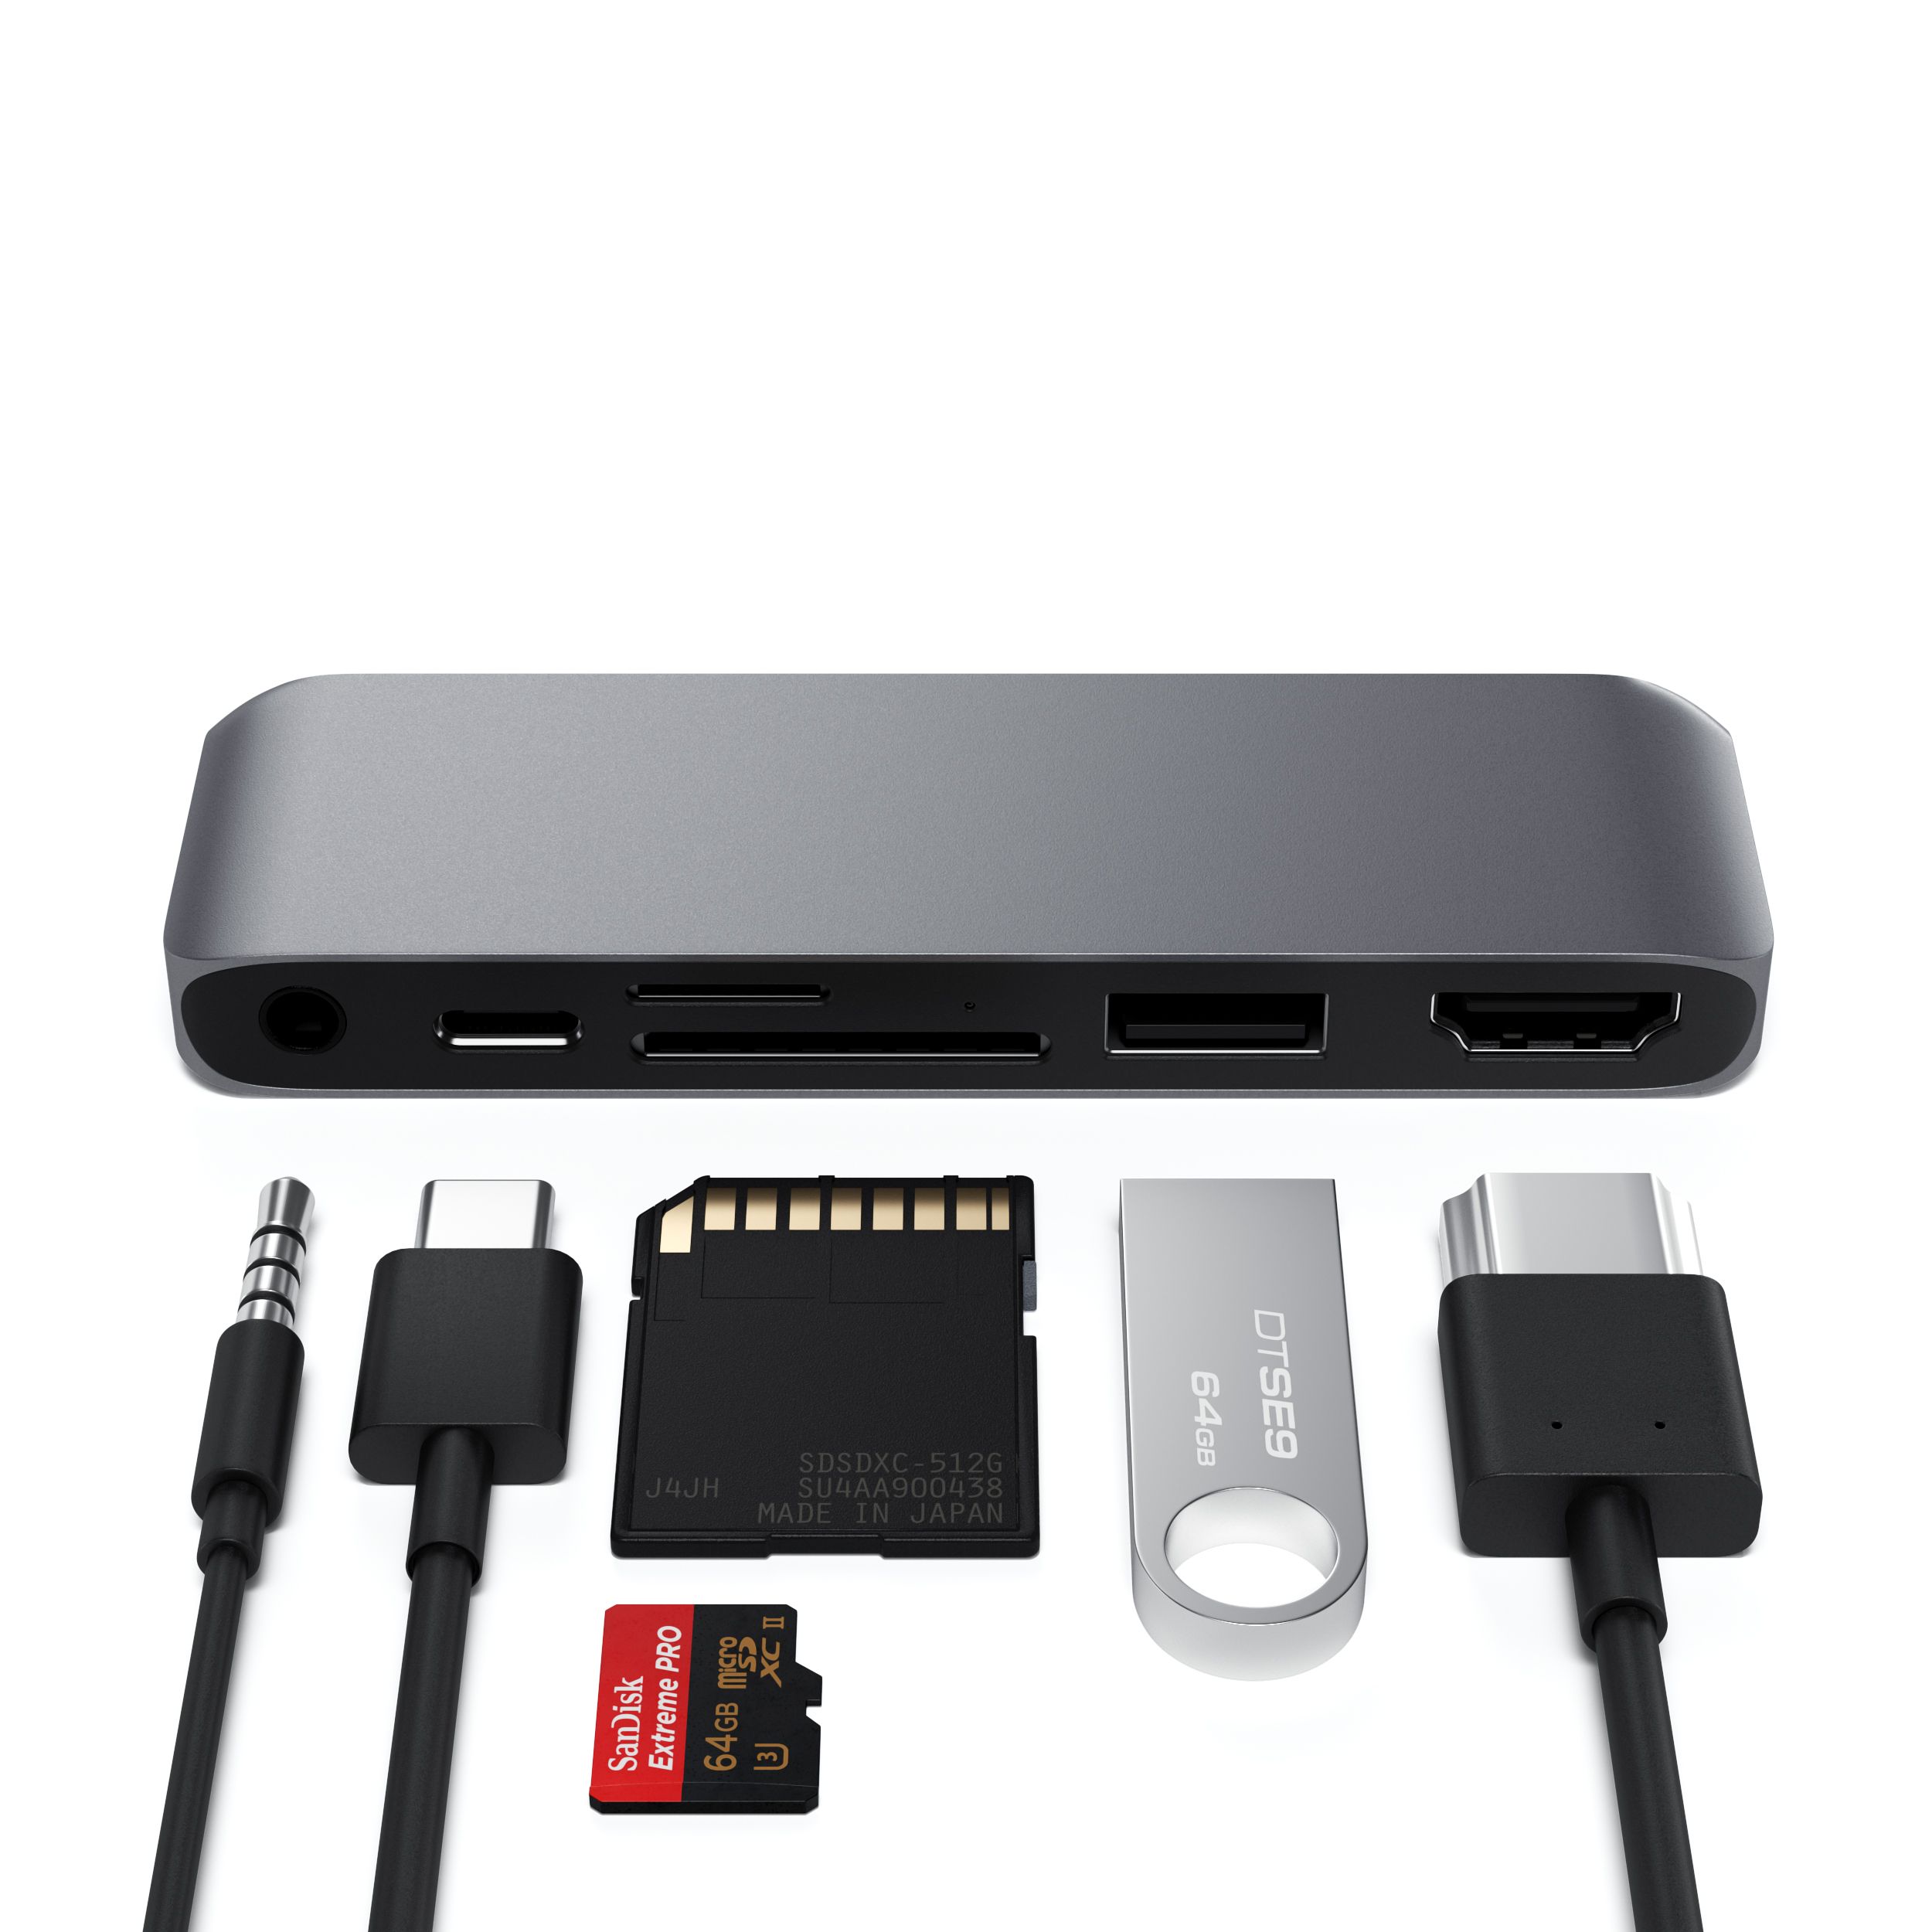 Satechi launches USB-C Mobile Pro Hub for iPad Pro/Air; Belkin debuts two GaN USB-C chargers